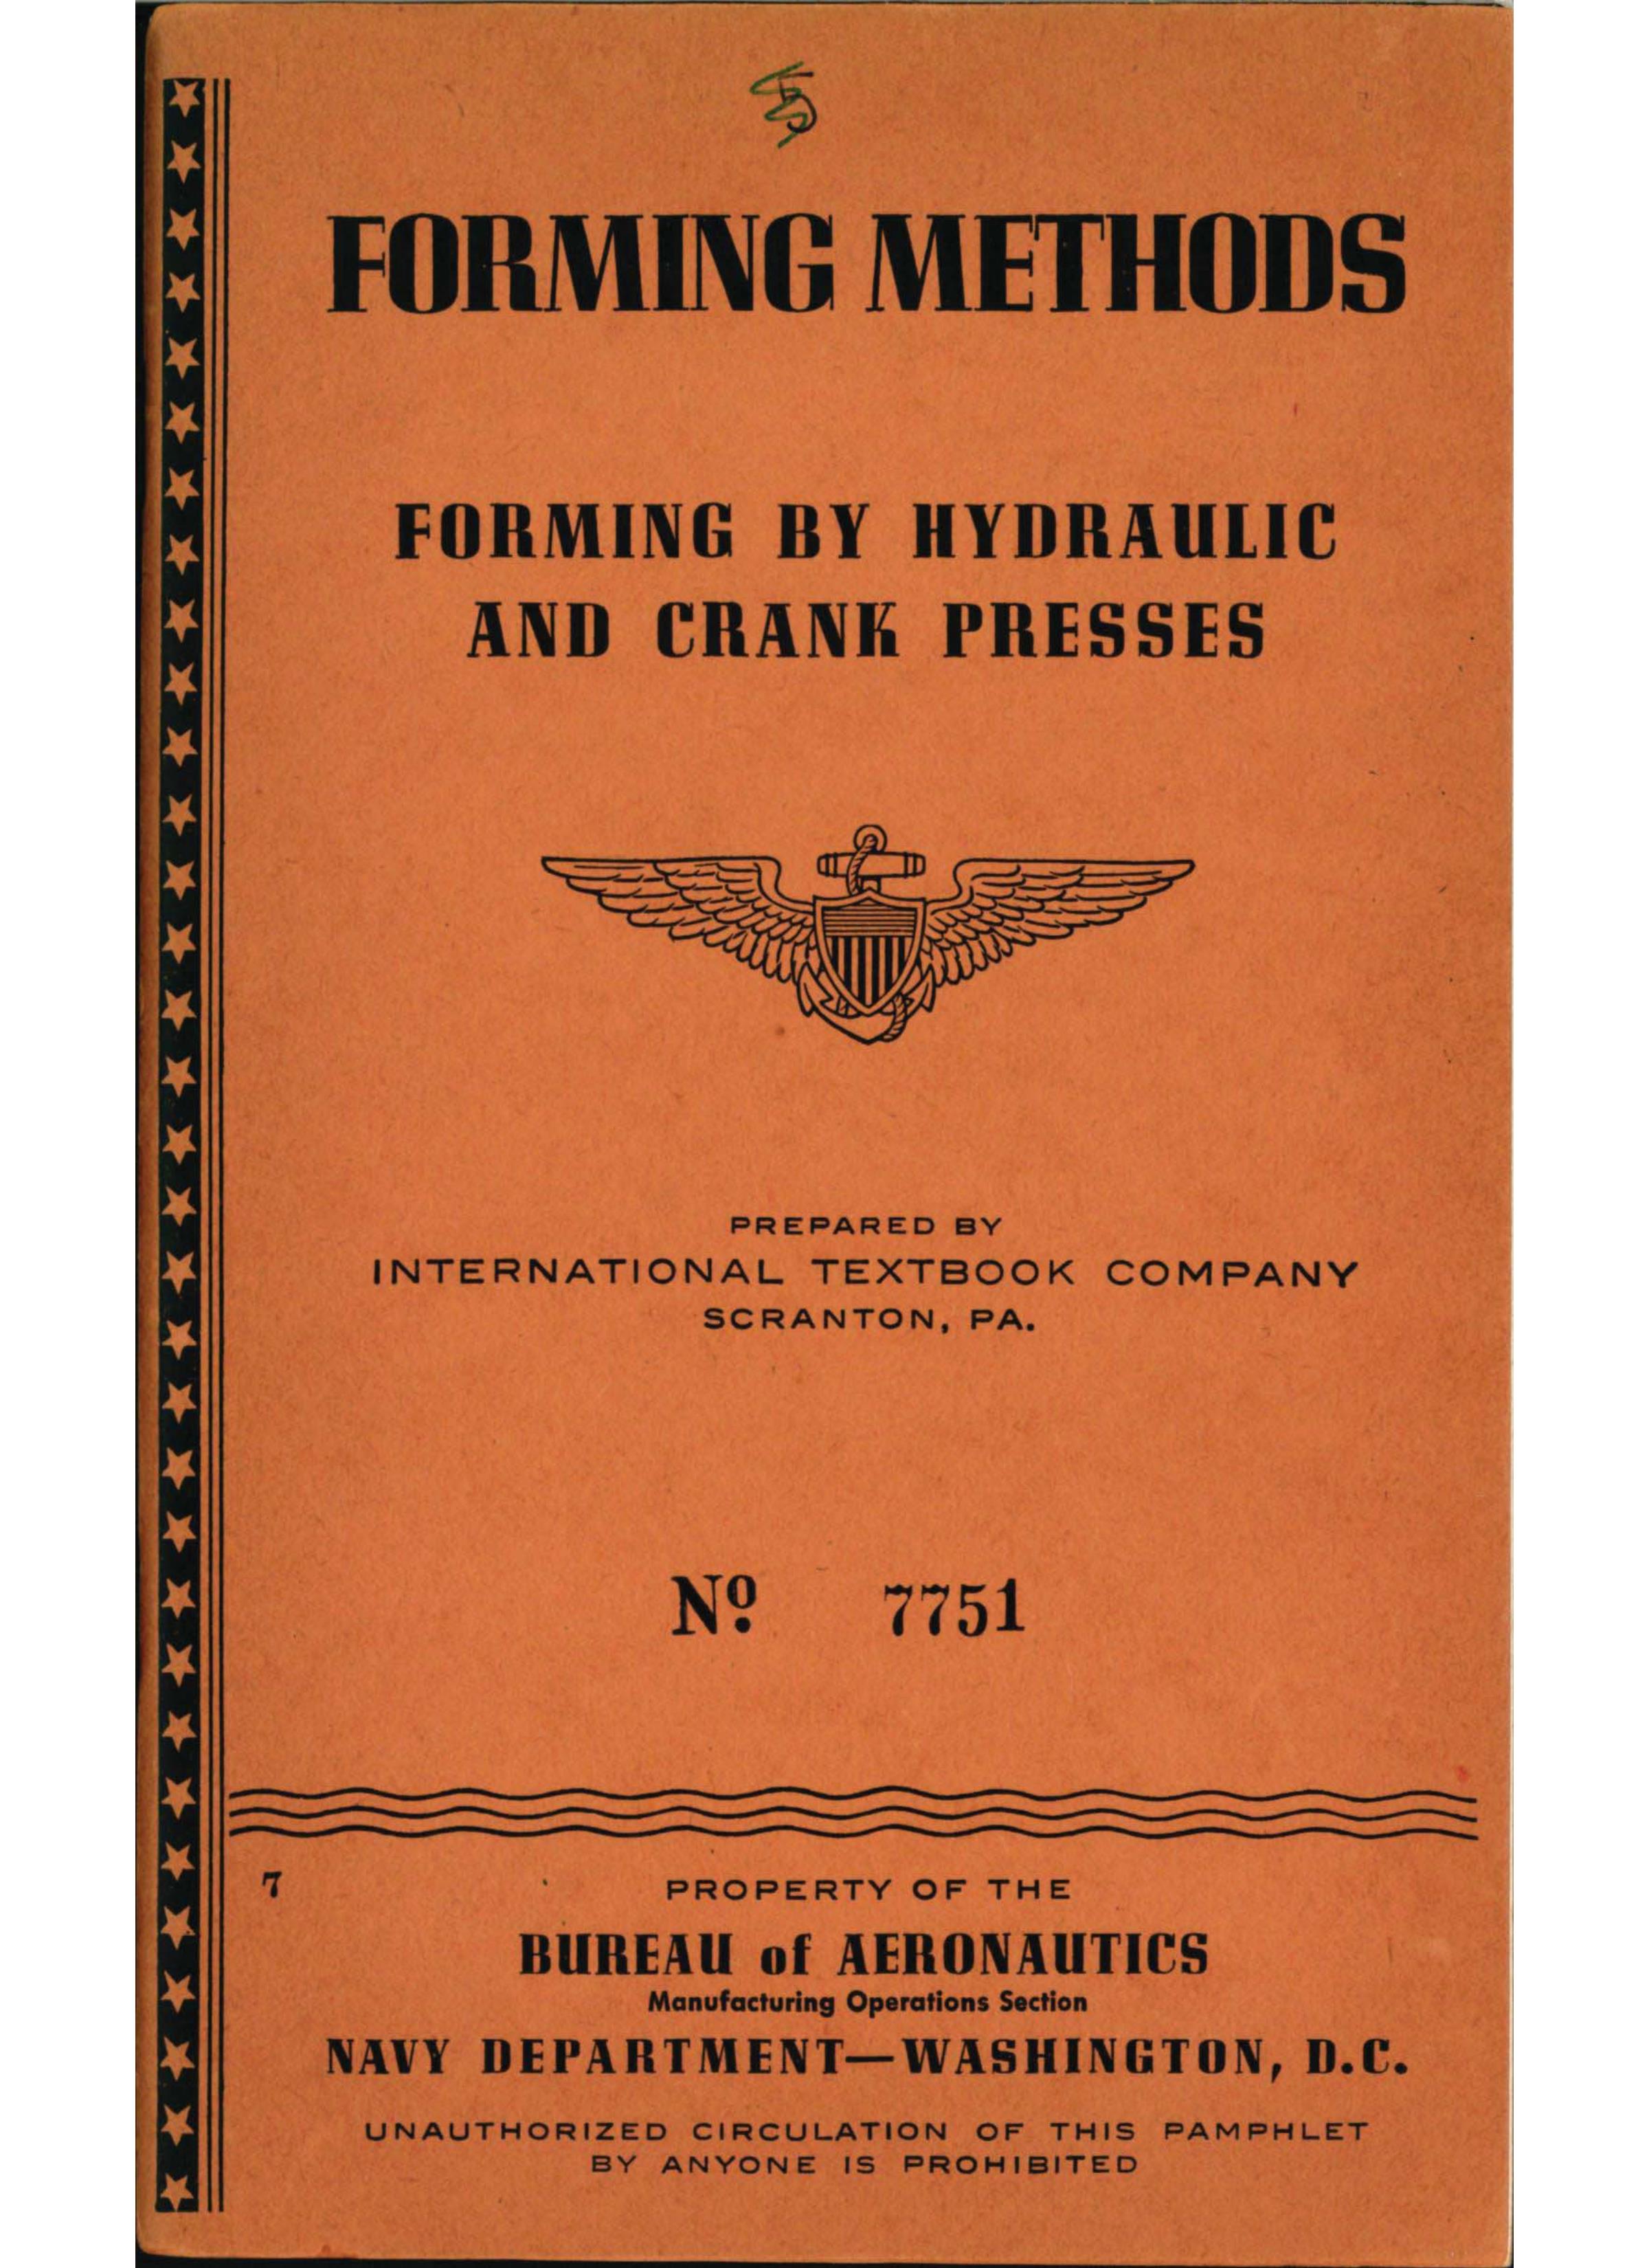 Sample page 1 from AirCorps Library document: Forming Methods - Hydraulic & Crank Presses - Bureau of Aeronautics